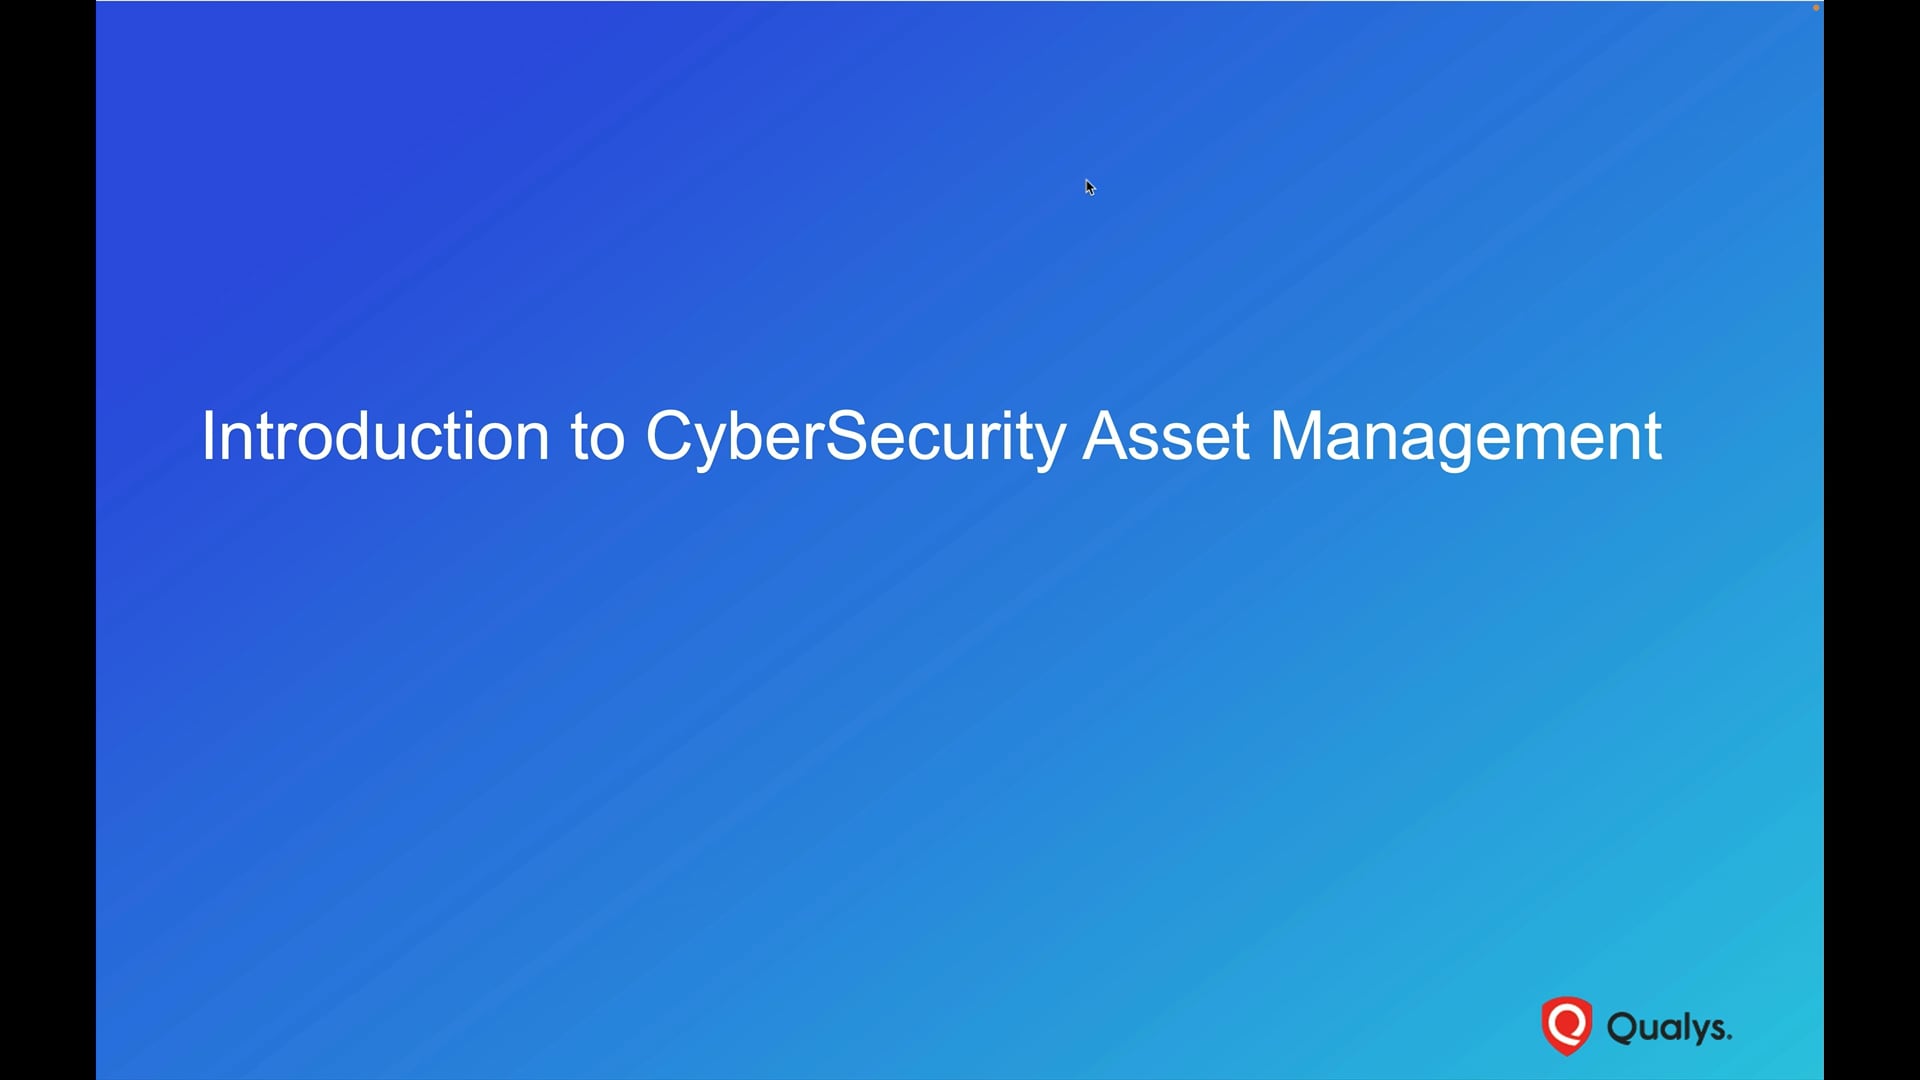 Introduction to CyberSecurity Asset Management (CSAM)